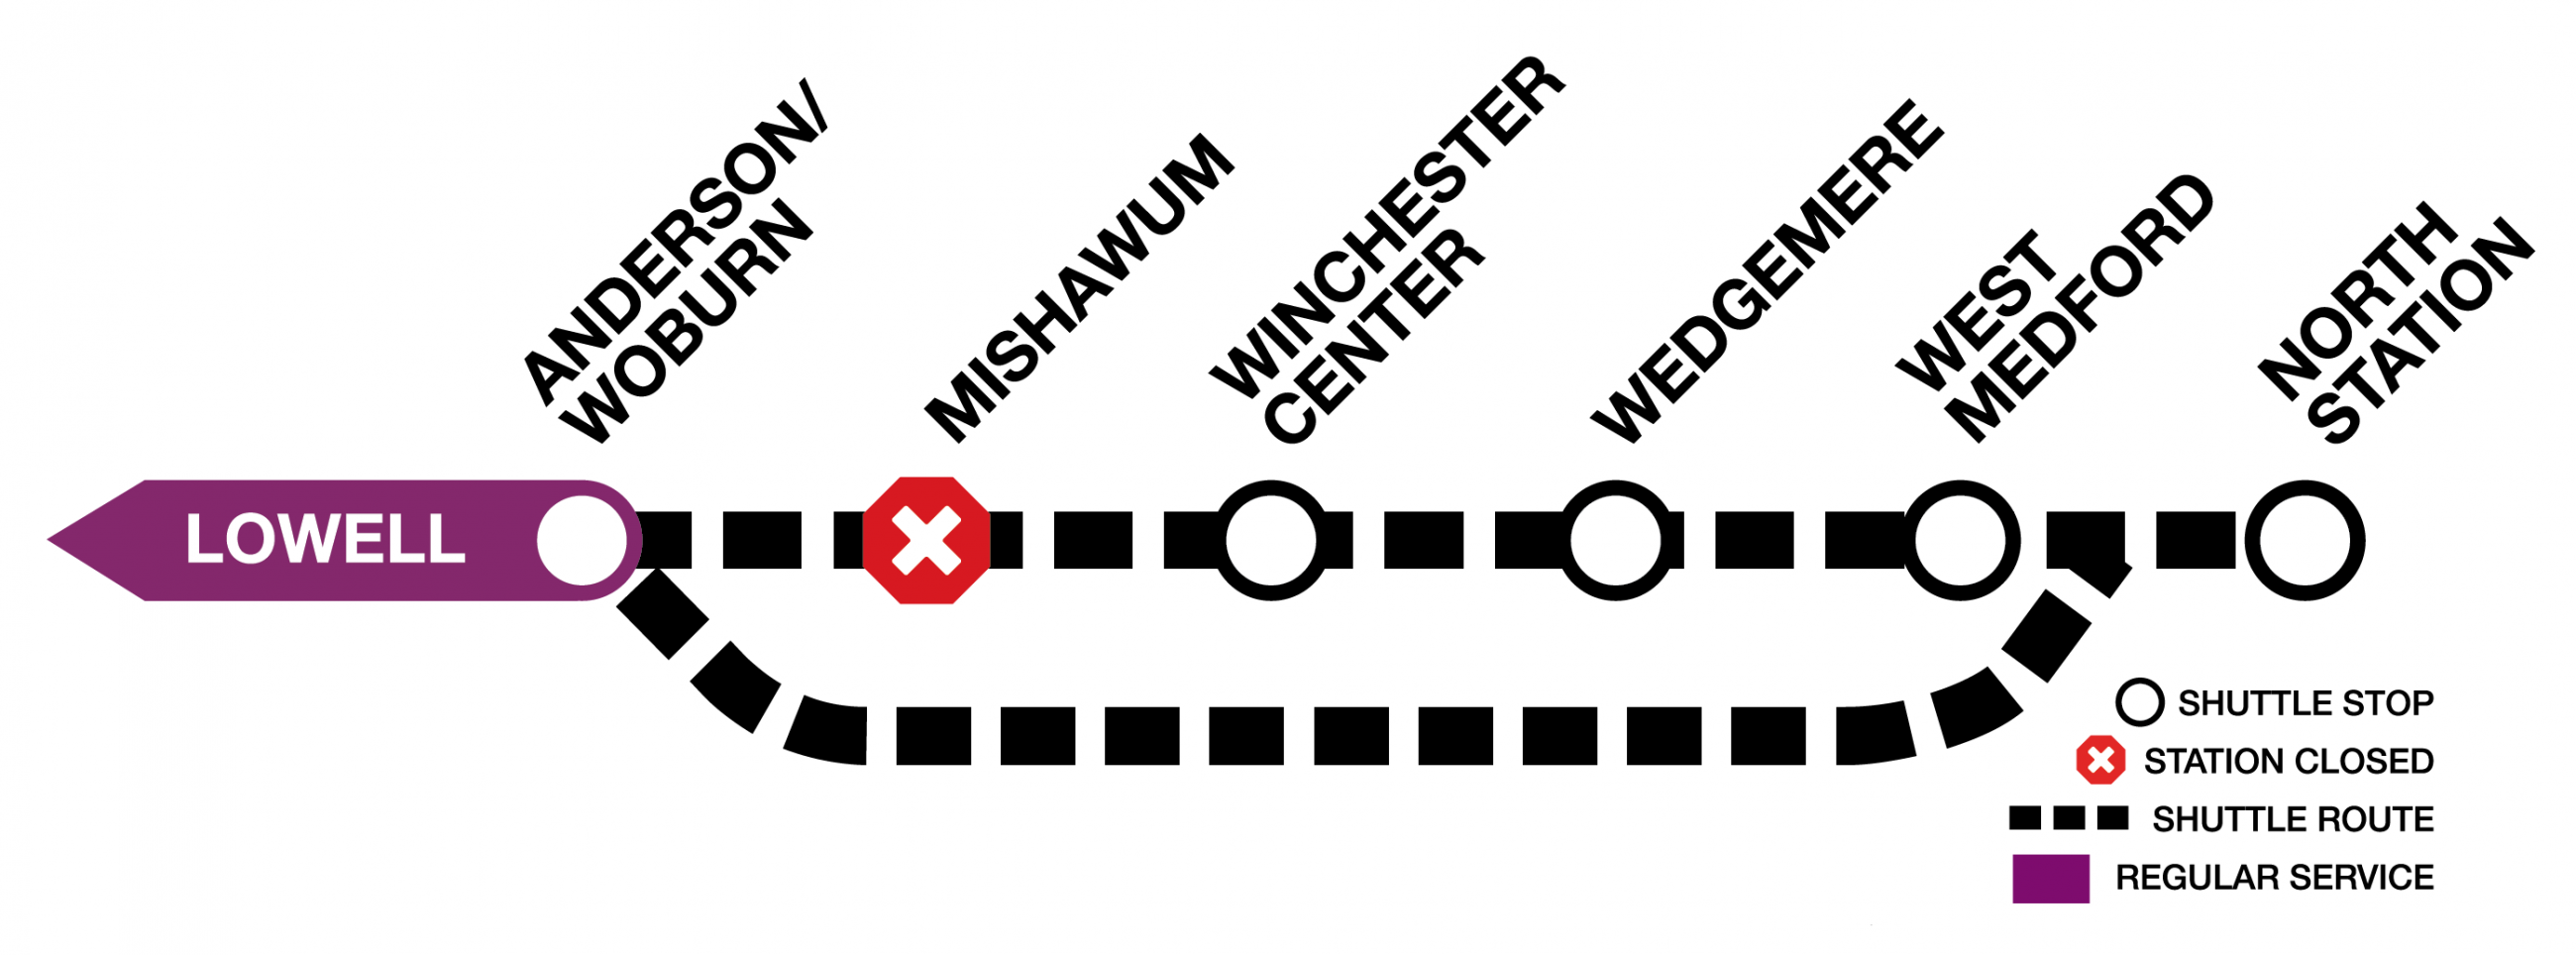 Graphic of the Lowell Line, showing bus shuttles making all stops between Anderson/Woburn and North Station, except for Mishawum. There is also an express shuttle from Anderson/Woburn directly to North Station.